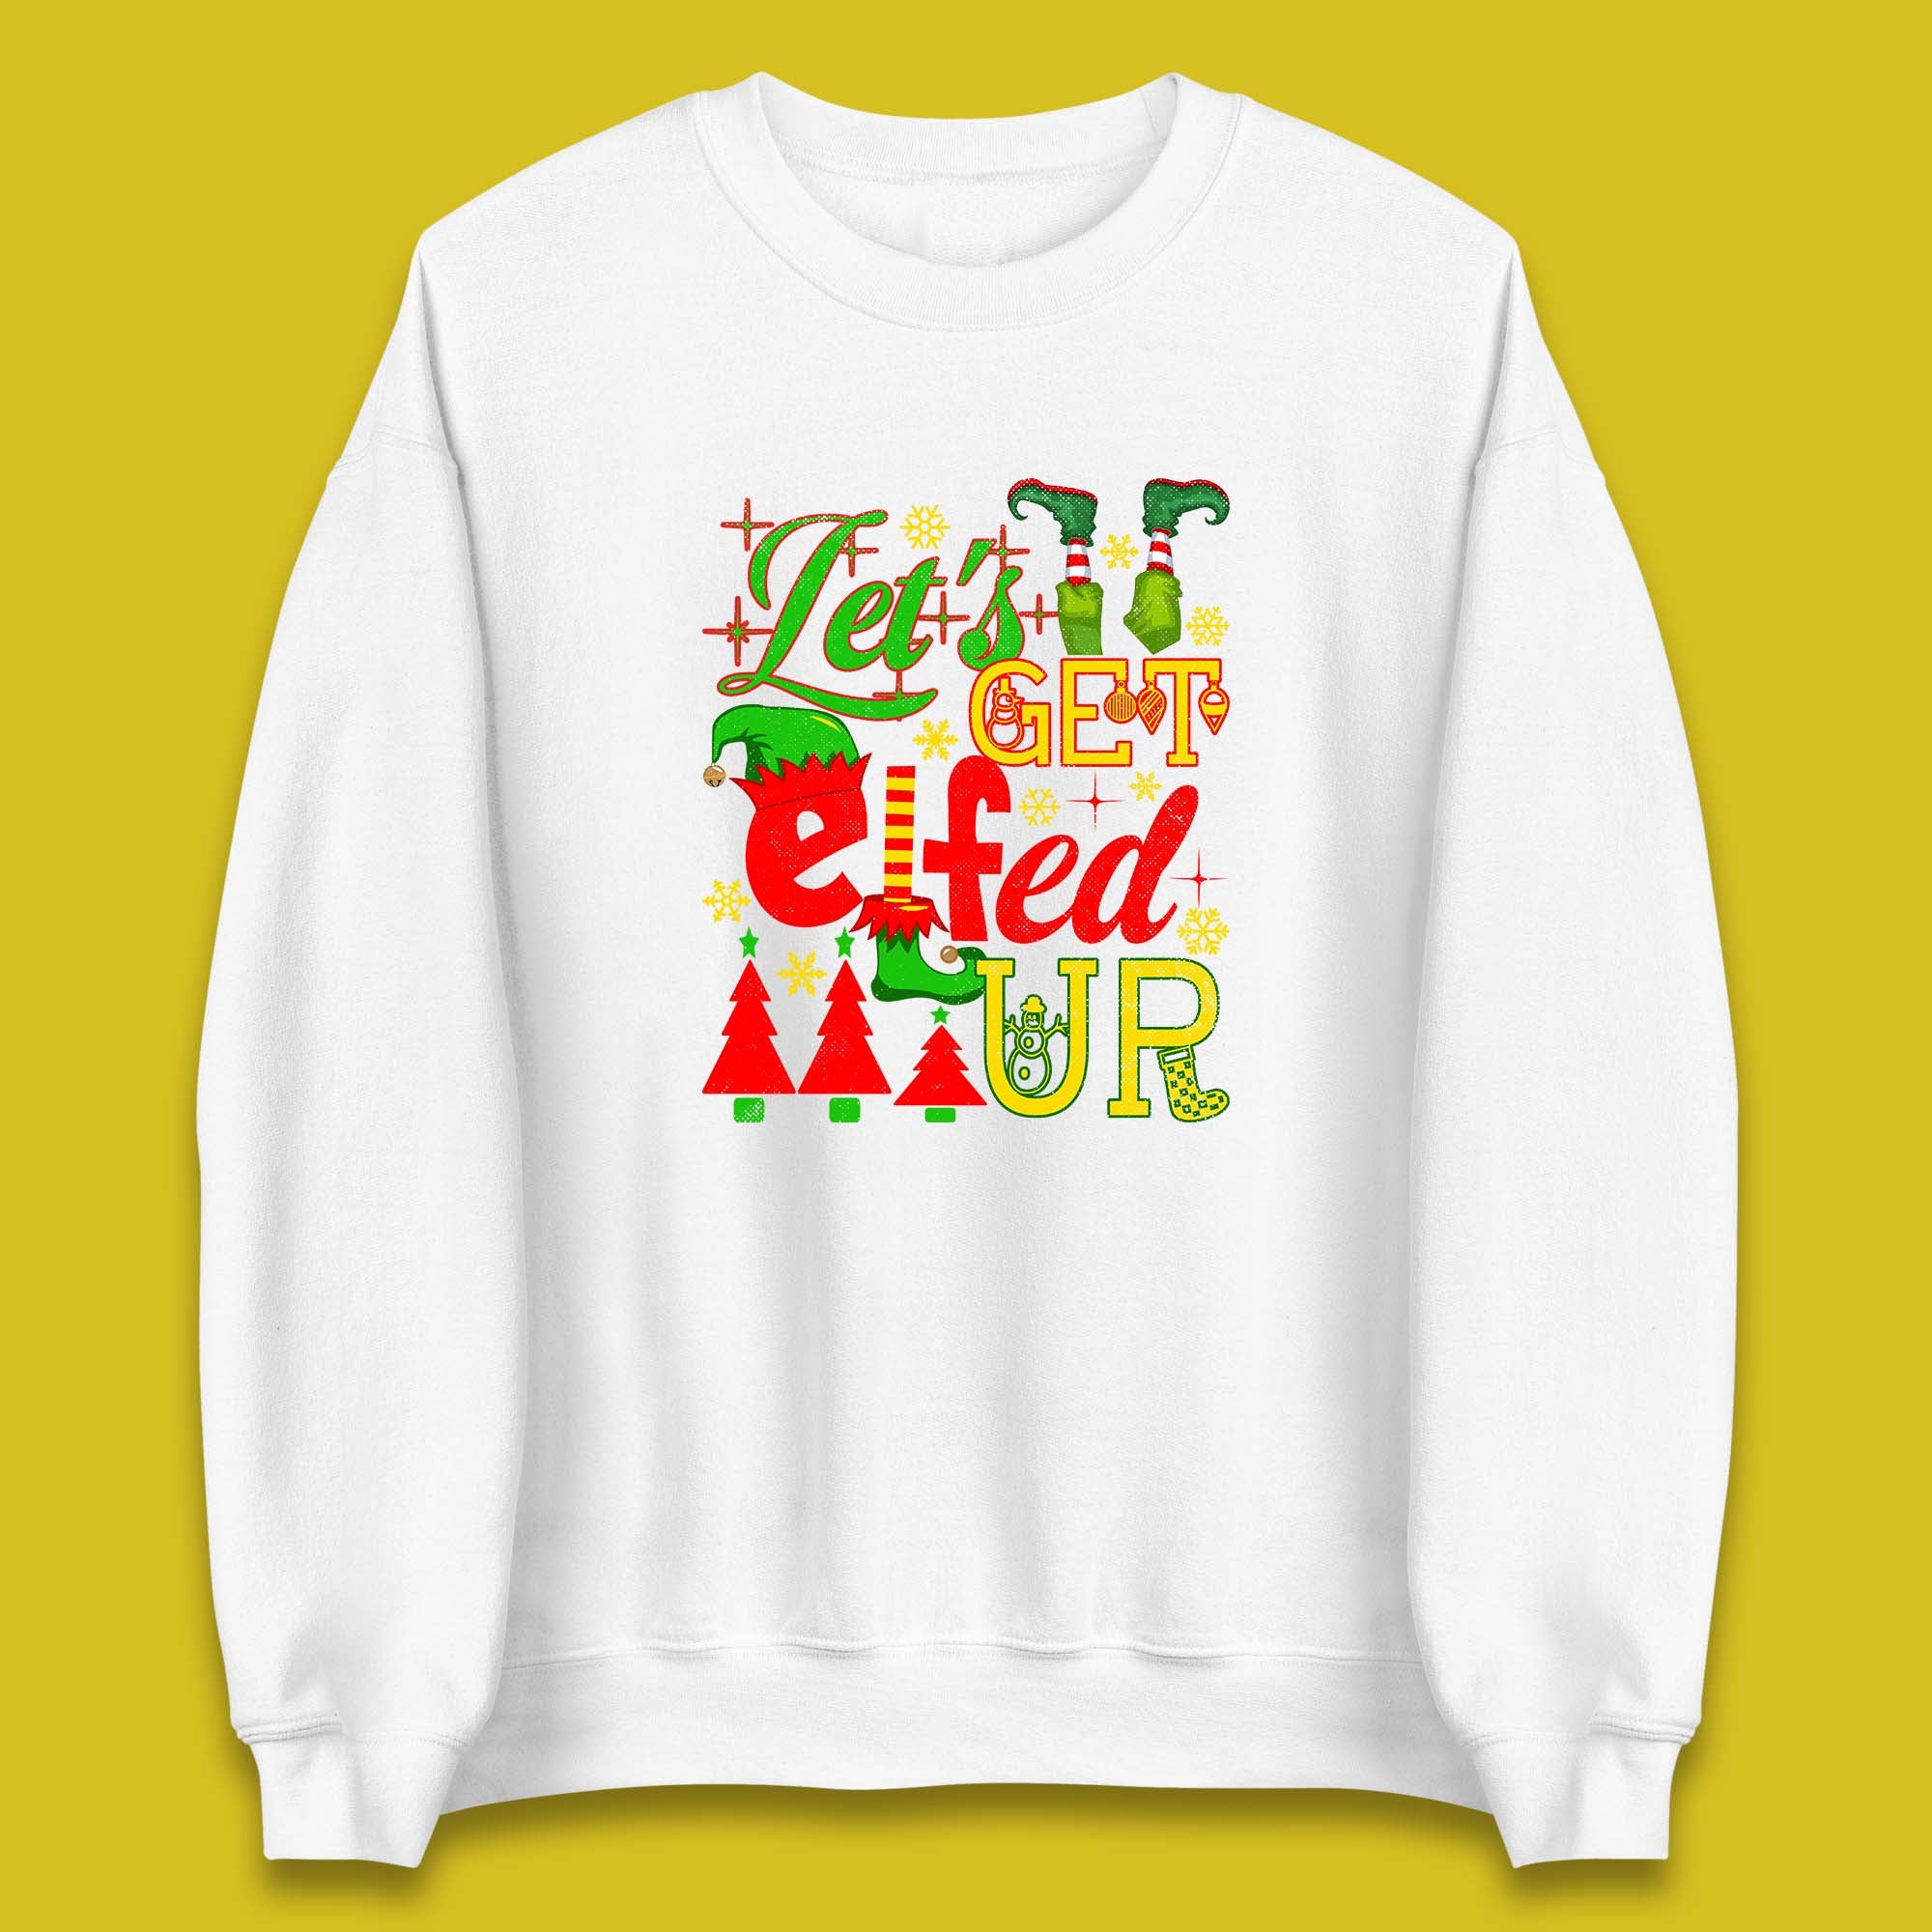 Let's Get Elfed Up Funny Drinking Christmas Bachelorette Party Xmas Holiday Fun Unisex Sweatshirt